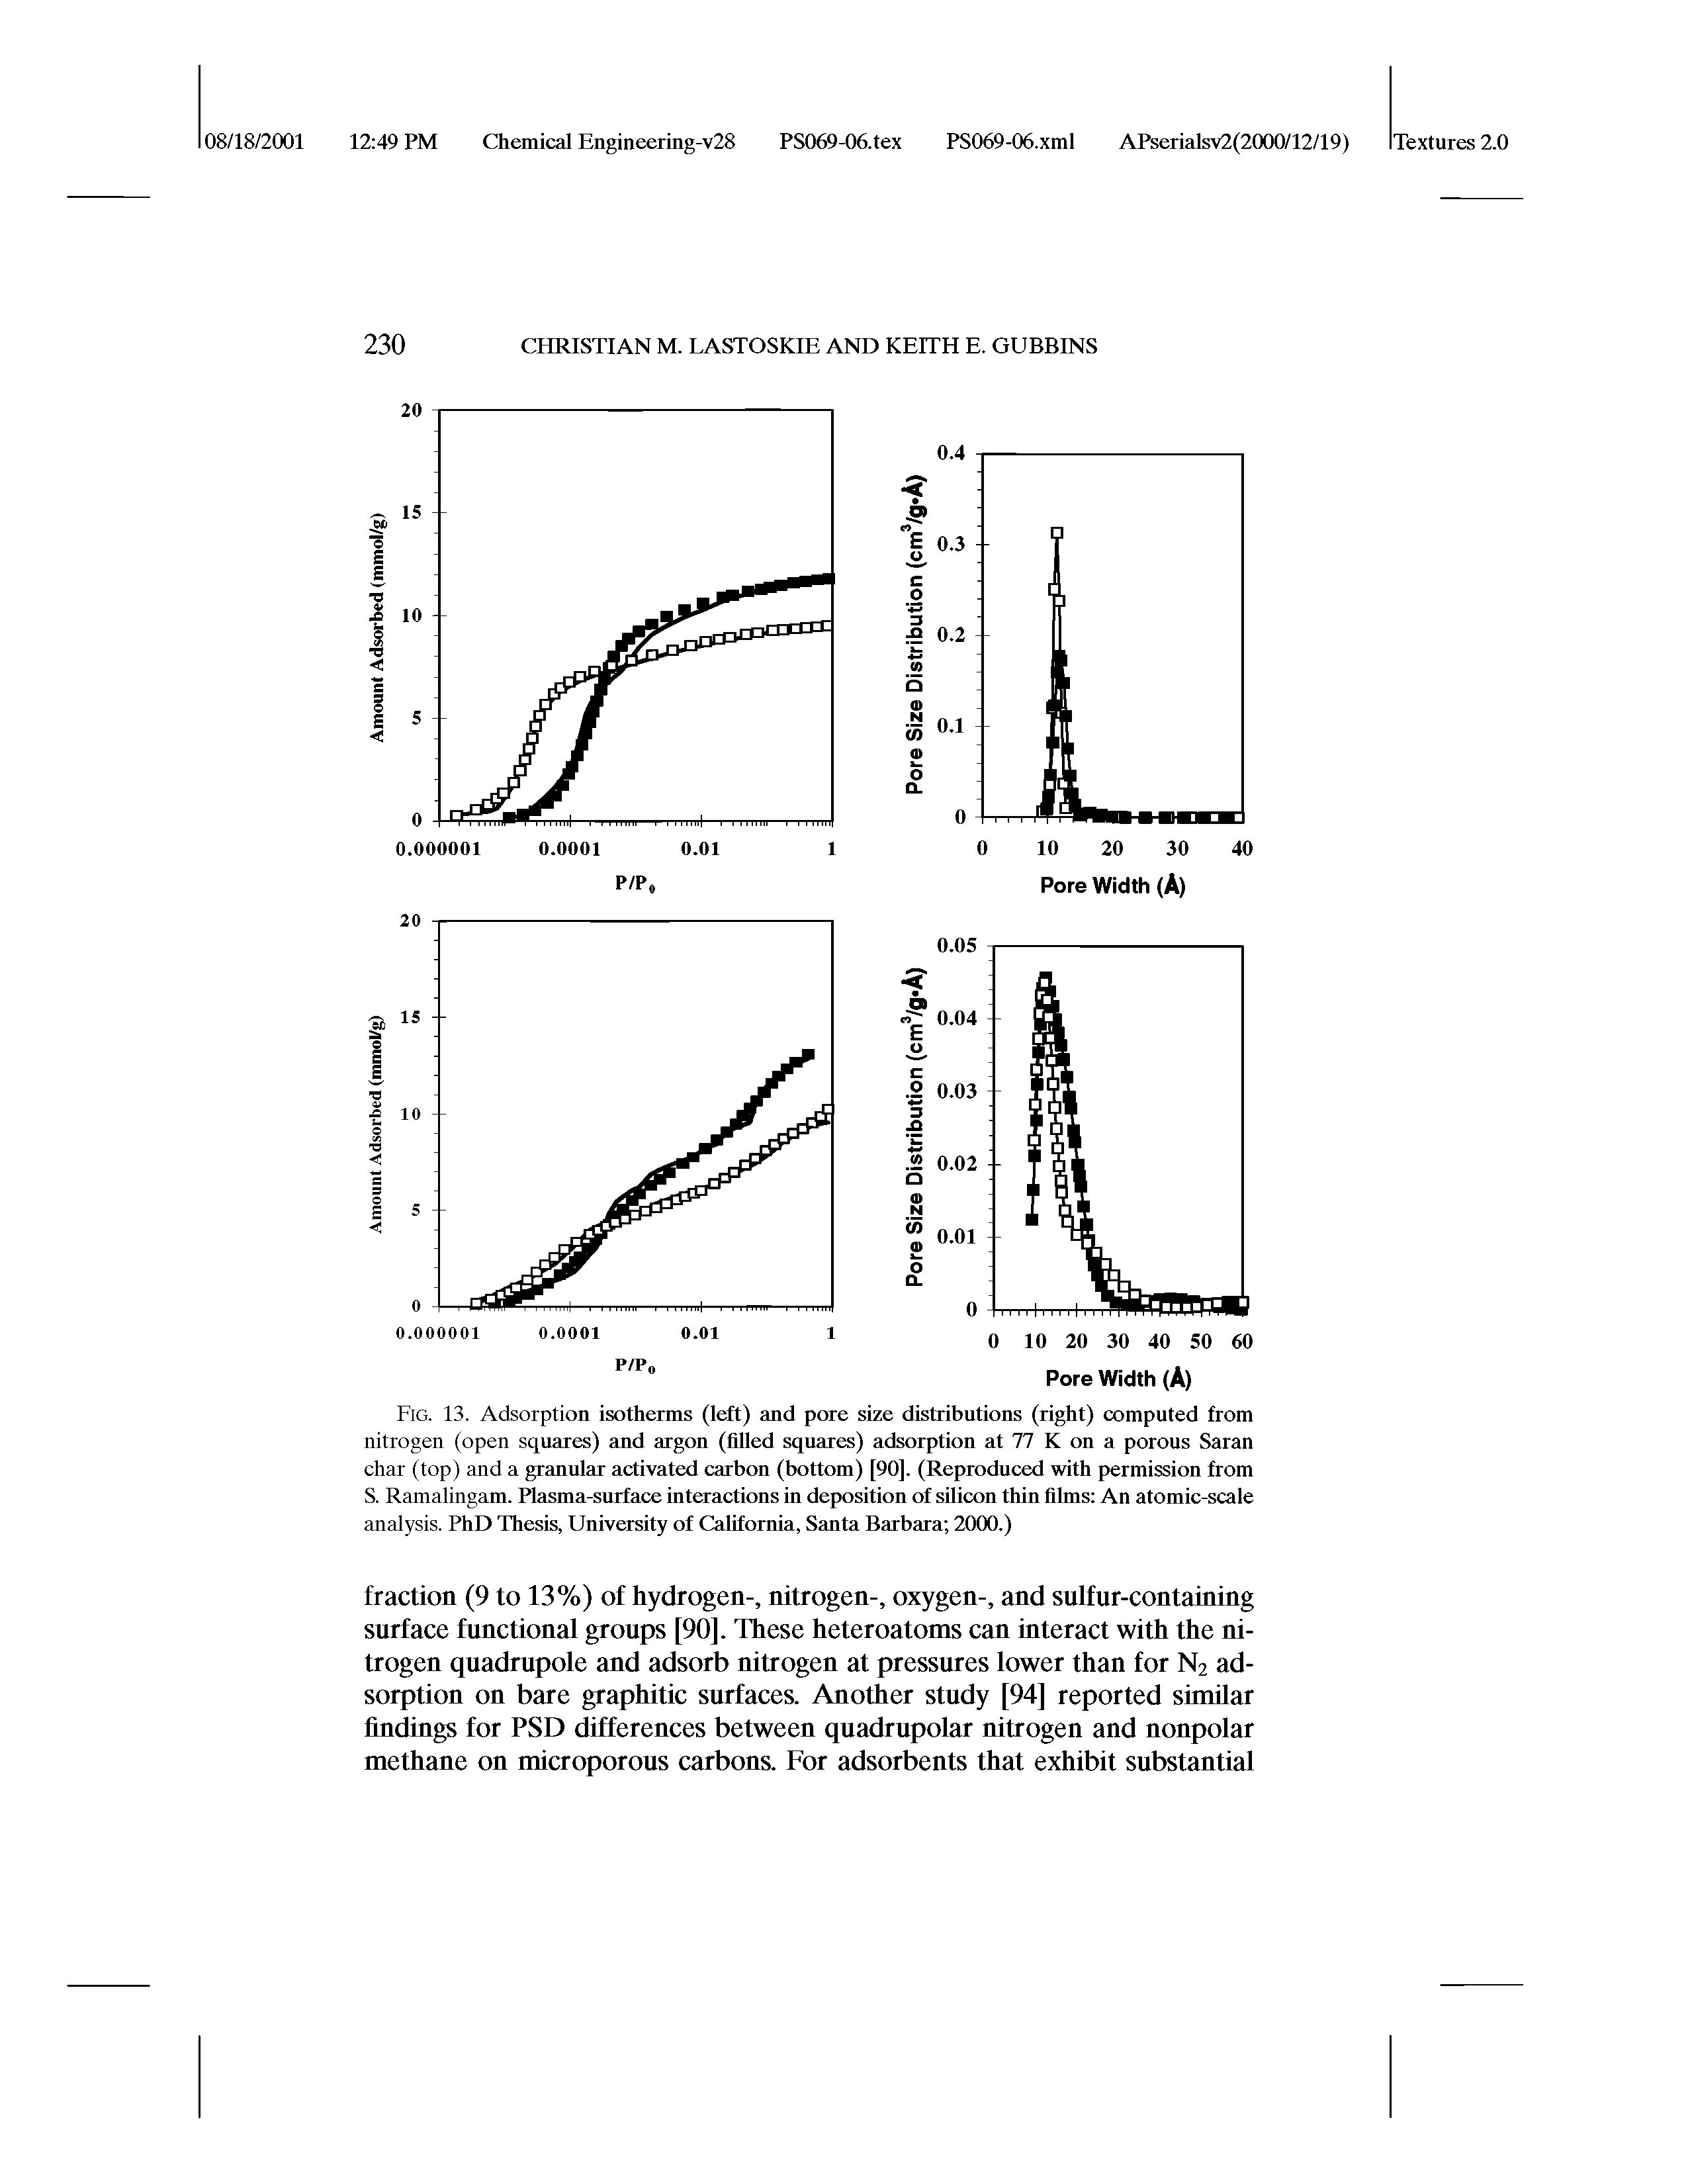 Fig. 13. Adsorption isotherms (left) and pore size distributions (right) computed from nitrogen (open squares) and argon (filled squares) adsorption at 77 K on a porous Saran char (top) and a granular activated carbon (bottom) [90]. (Reproduced with permission from S. Ramalingam. Plasma-surface interactions in deposition of silicon thin films An atomic-scale analysis. PhD Thesis, University of California, Santa Barbara 2000.)...